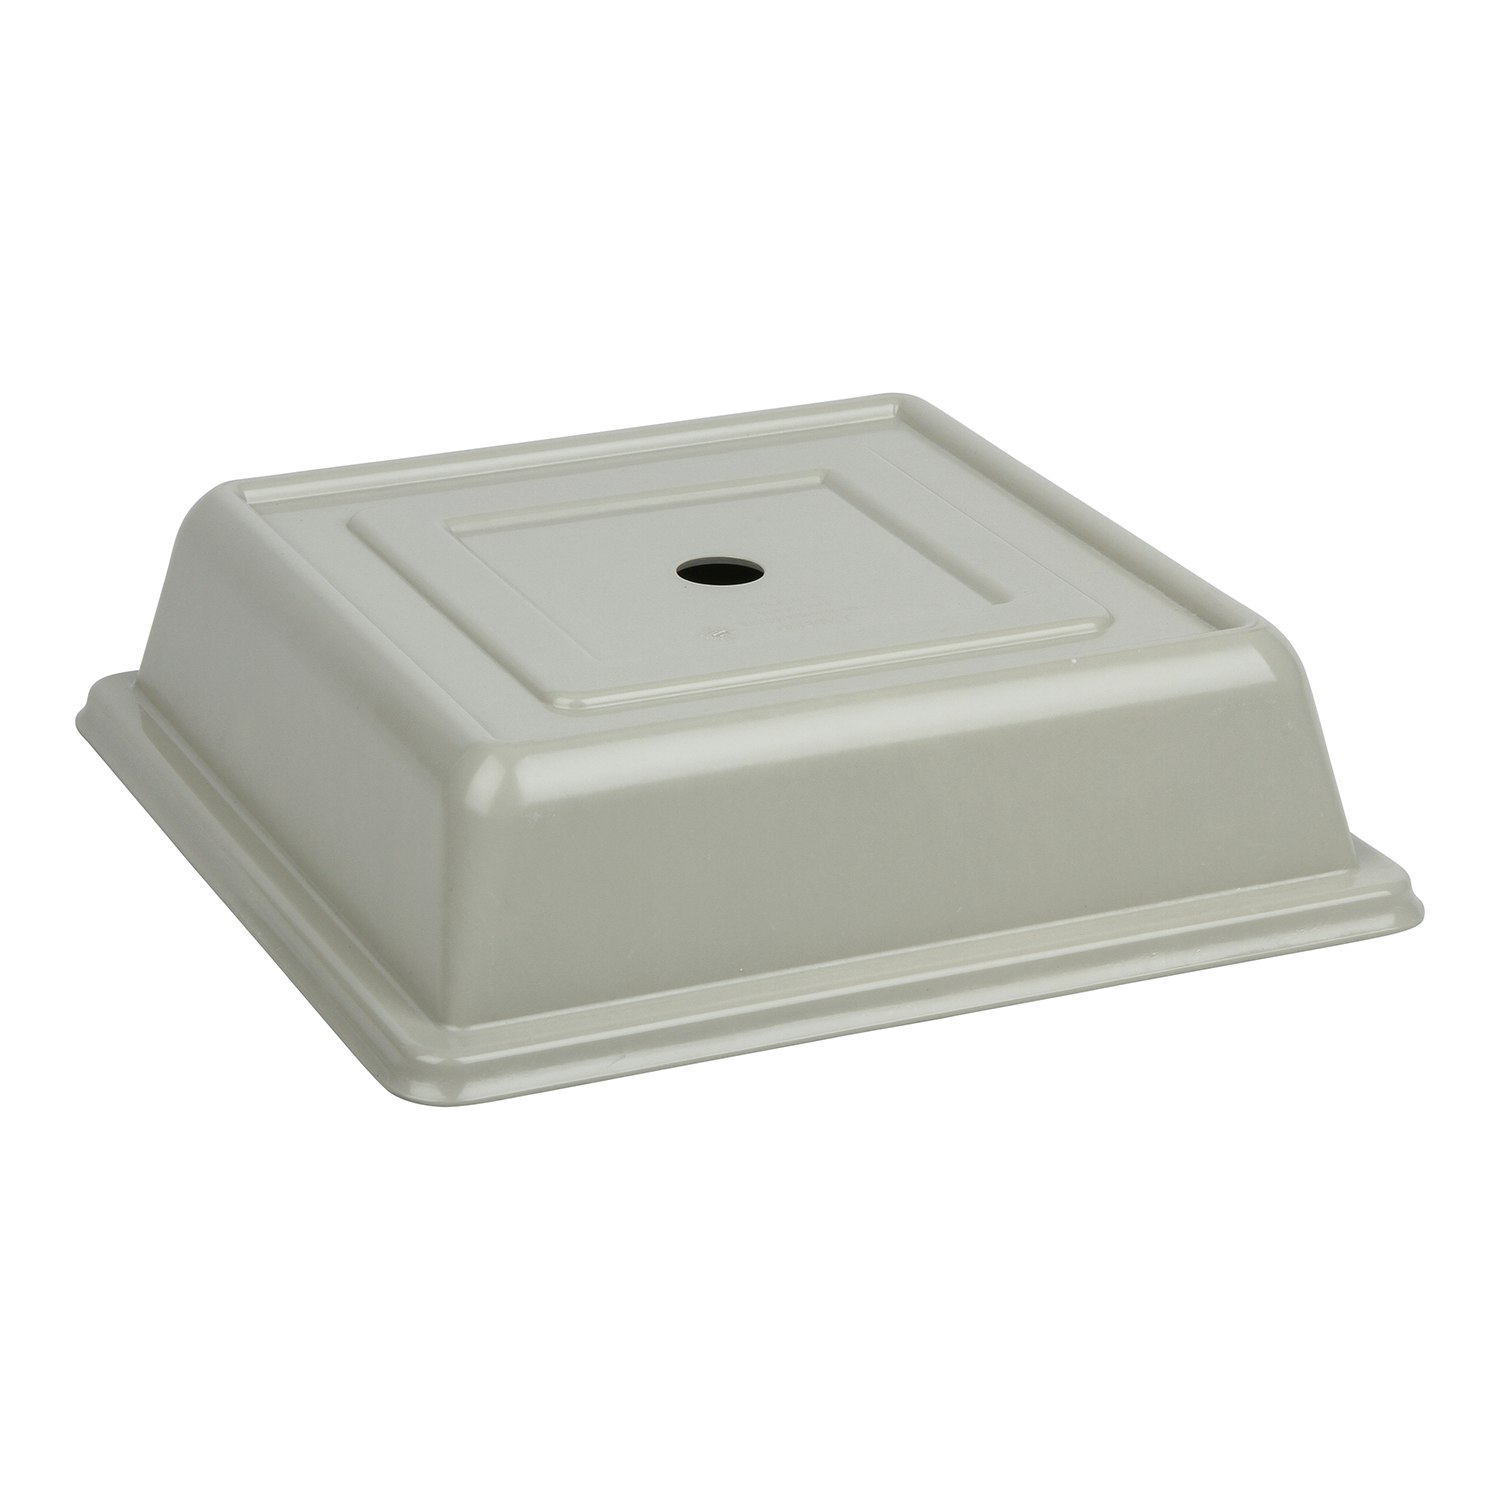 Cambro Plate Covers are the Choice for Banquets - the CAMBRO blog